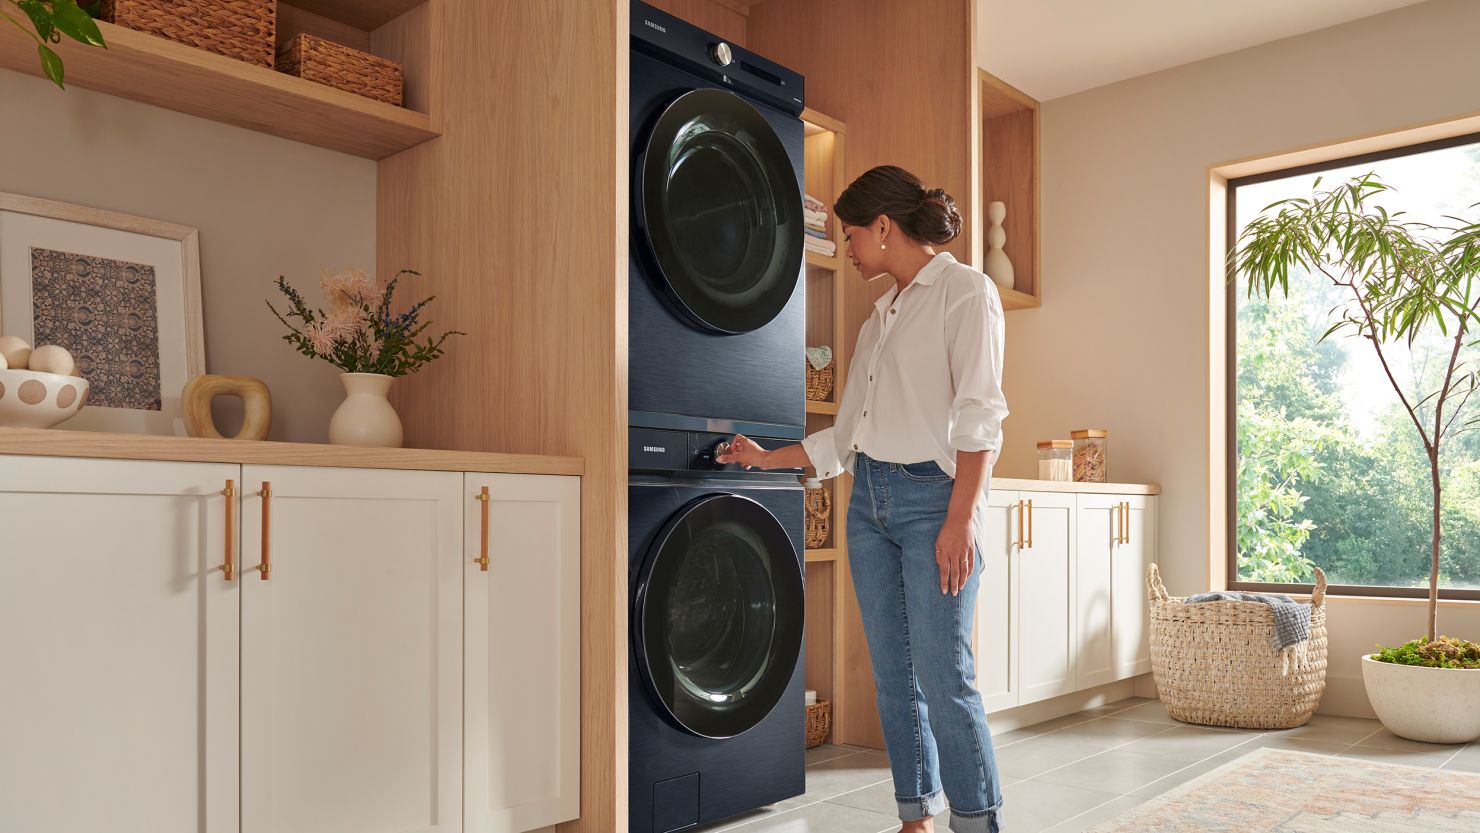 5 Best Compact Washer Dryer Combo Units